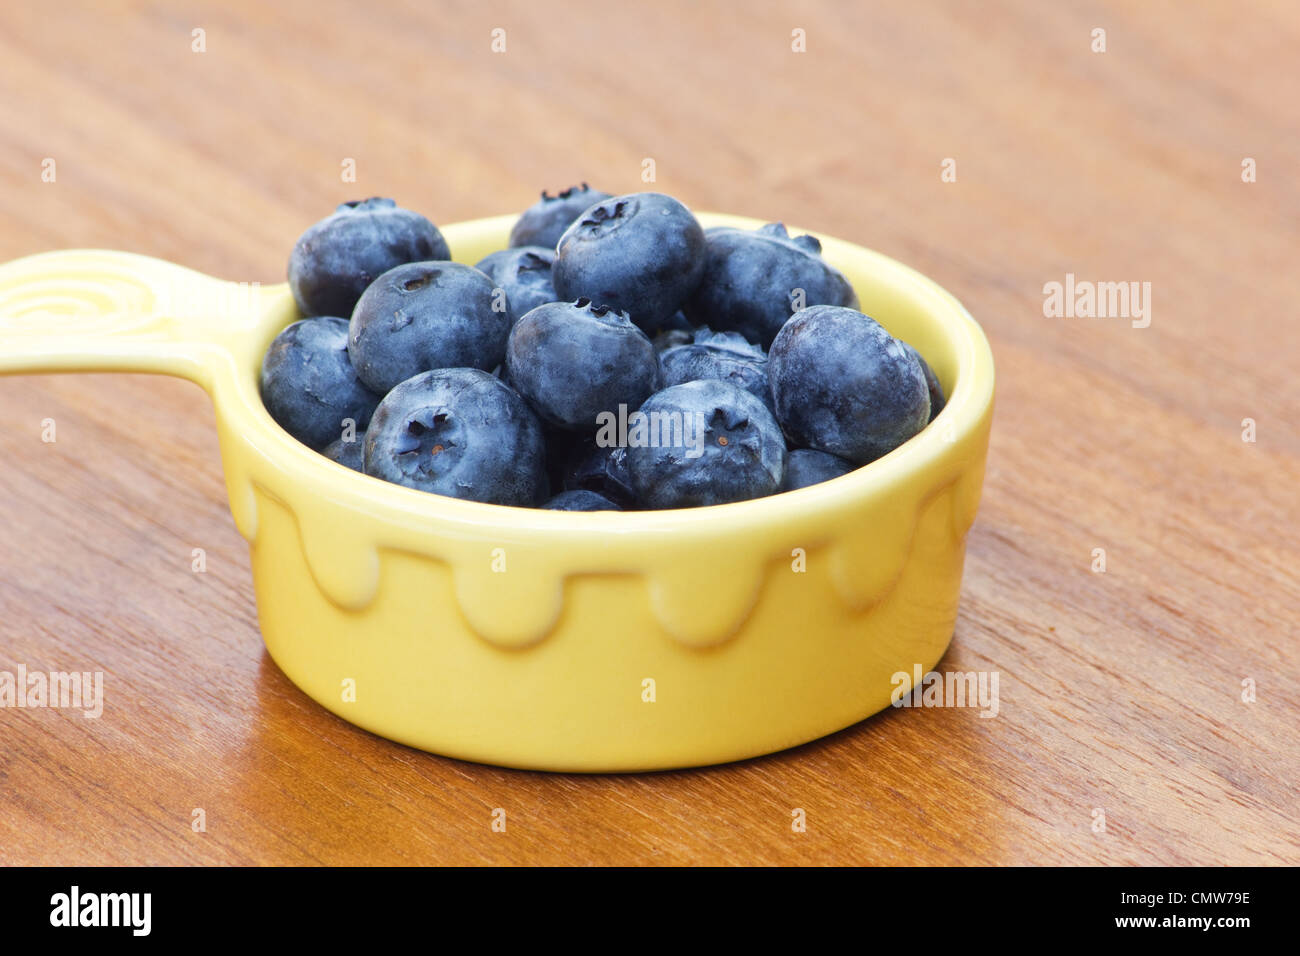 Blueberries in a yellow bowl on wooden background Stock Photo